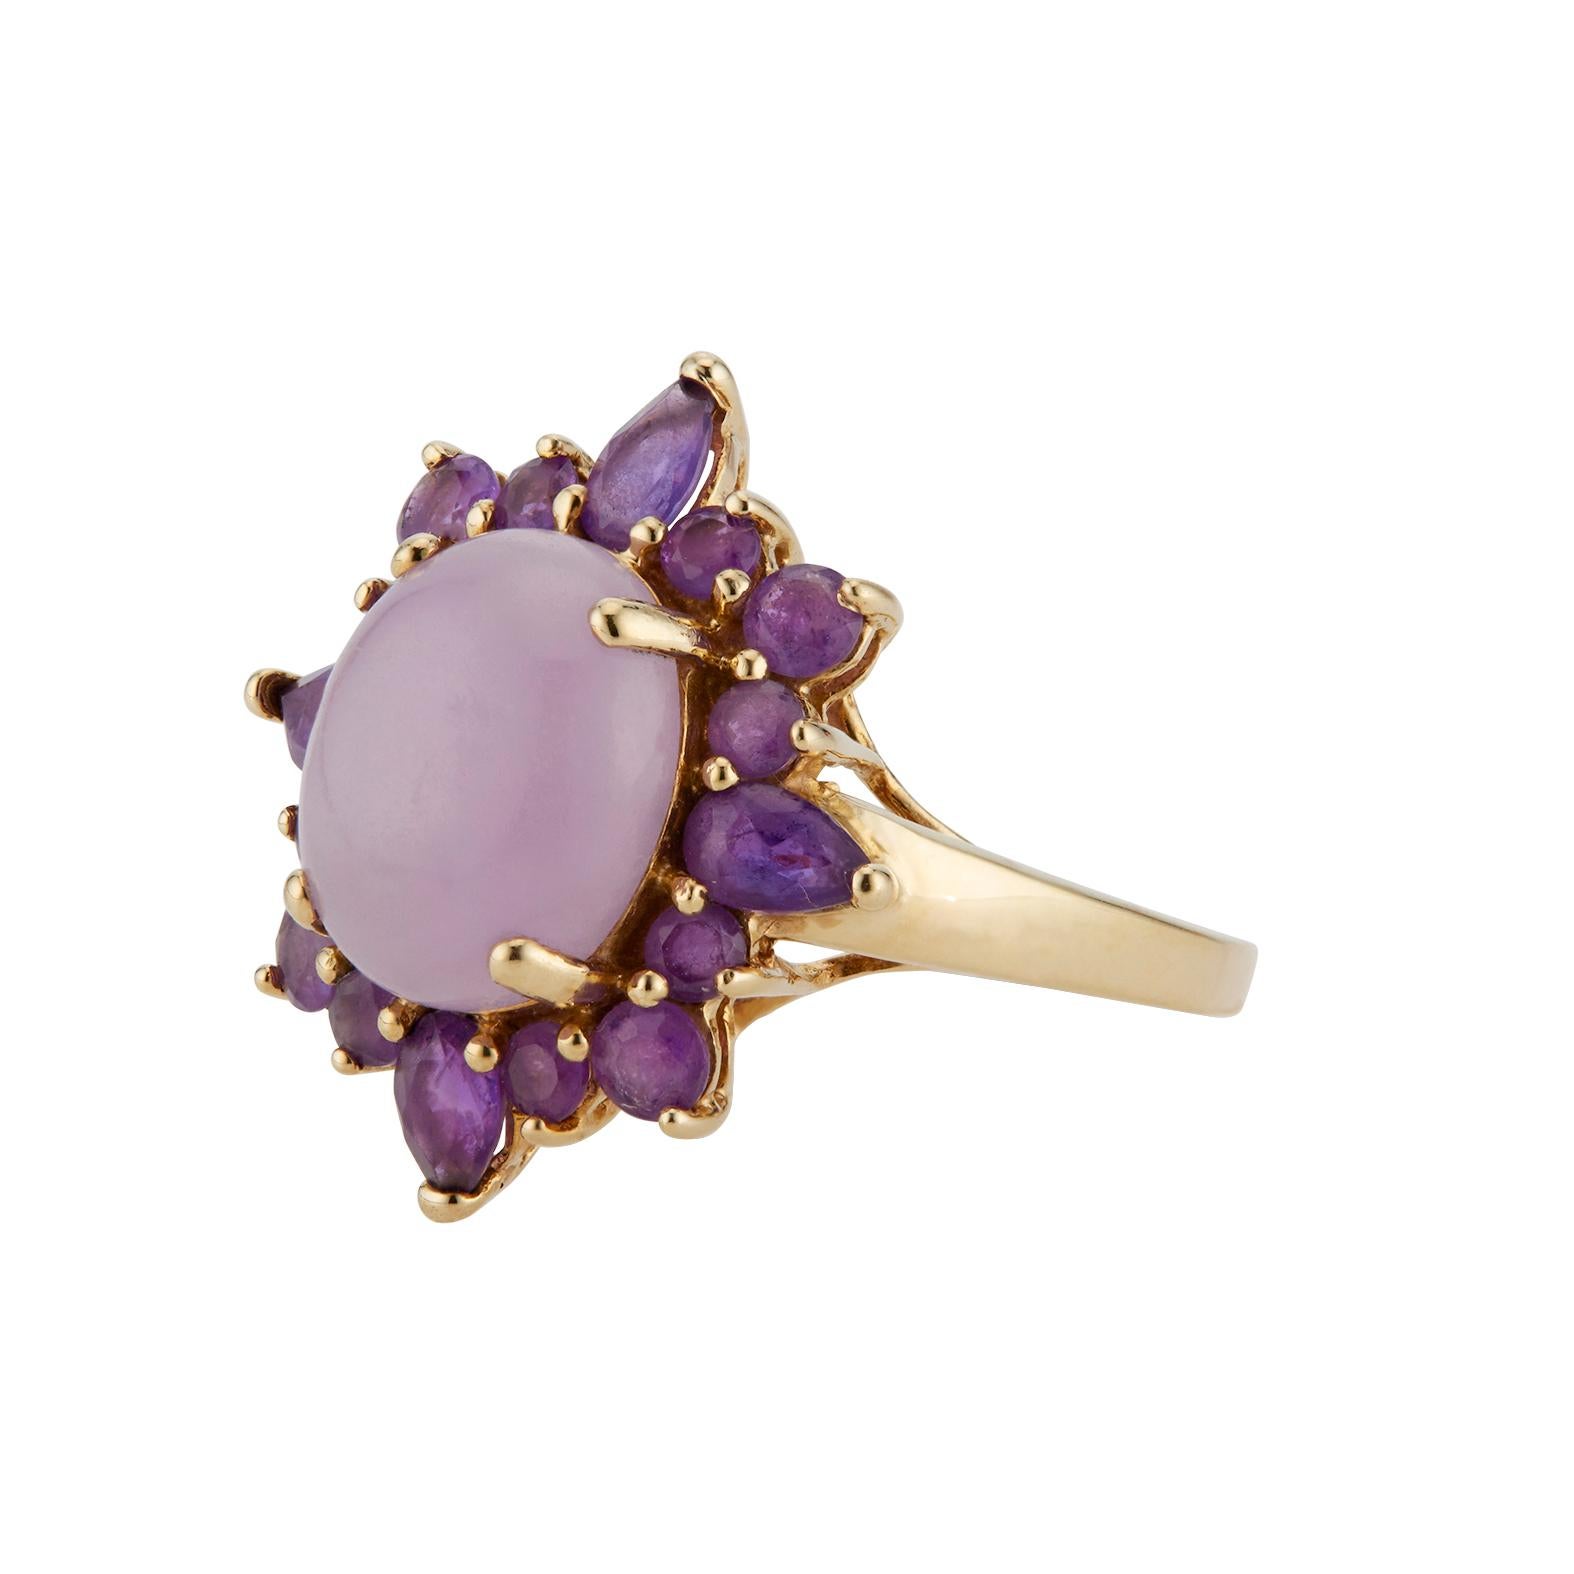 Purple Jadeite Jade garnet ring. GIA certified cabochon purple jadeite center stone with a halo of round and pear shaped garnets in a 14k yellow gold setting.  “B” grad Jadeite Jade GIA certified polymer impregnated 14k gold.

1 cabochon purple